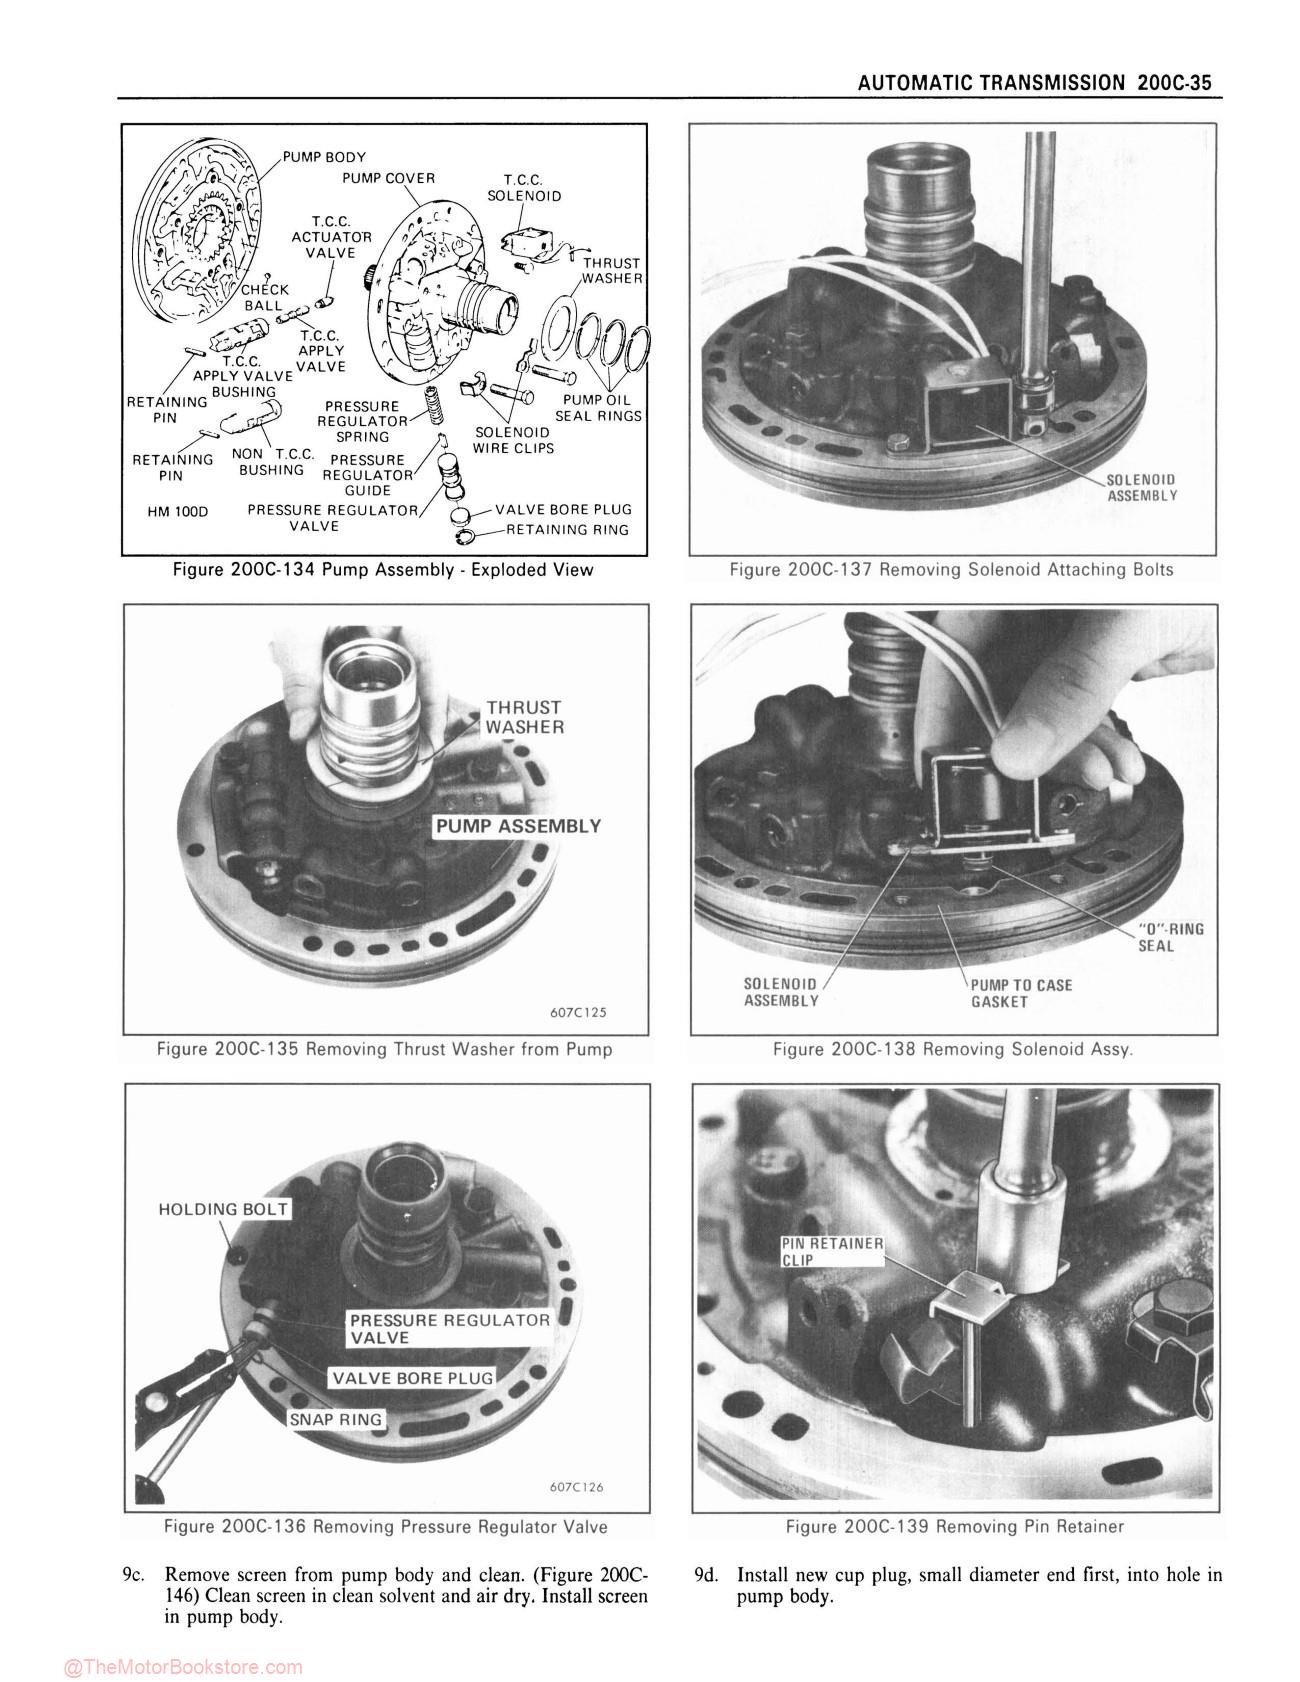 1983 Buick Service Manual All Models - Sample Page 2